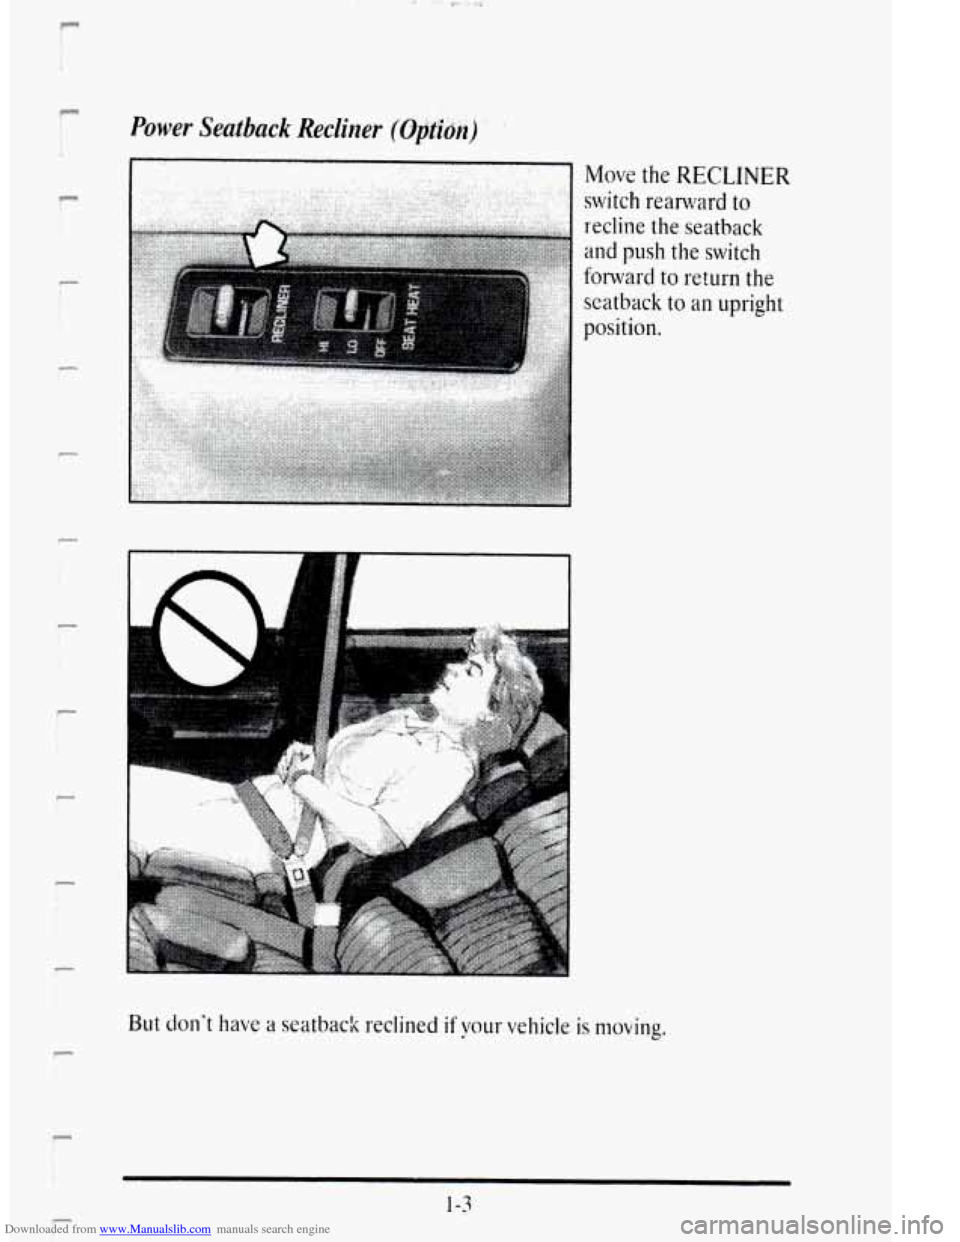 CADILLAC DEVILLE 1995 7.G Owners Manual Downloaded from www.Manualslib.com manuals search engine n 
r 
F 
P 
P 
I 
P 
Power Seatback Recliner (O@diz) 
U 
Move the RECLINER 
switch rearward to 
recline the seatback 
and push the switch 
forw